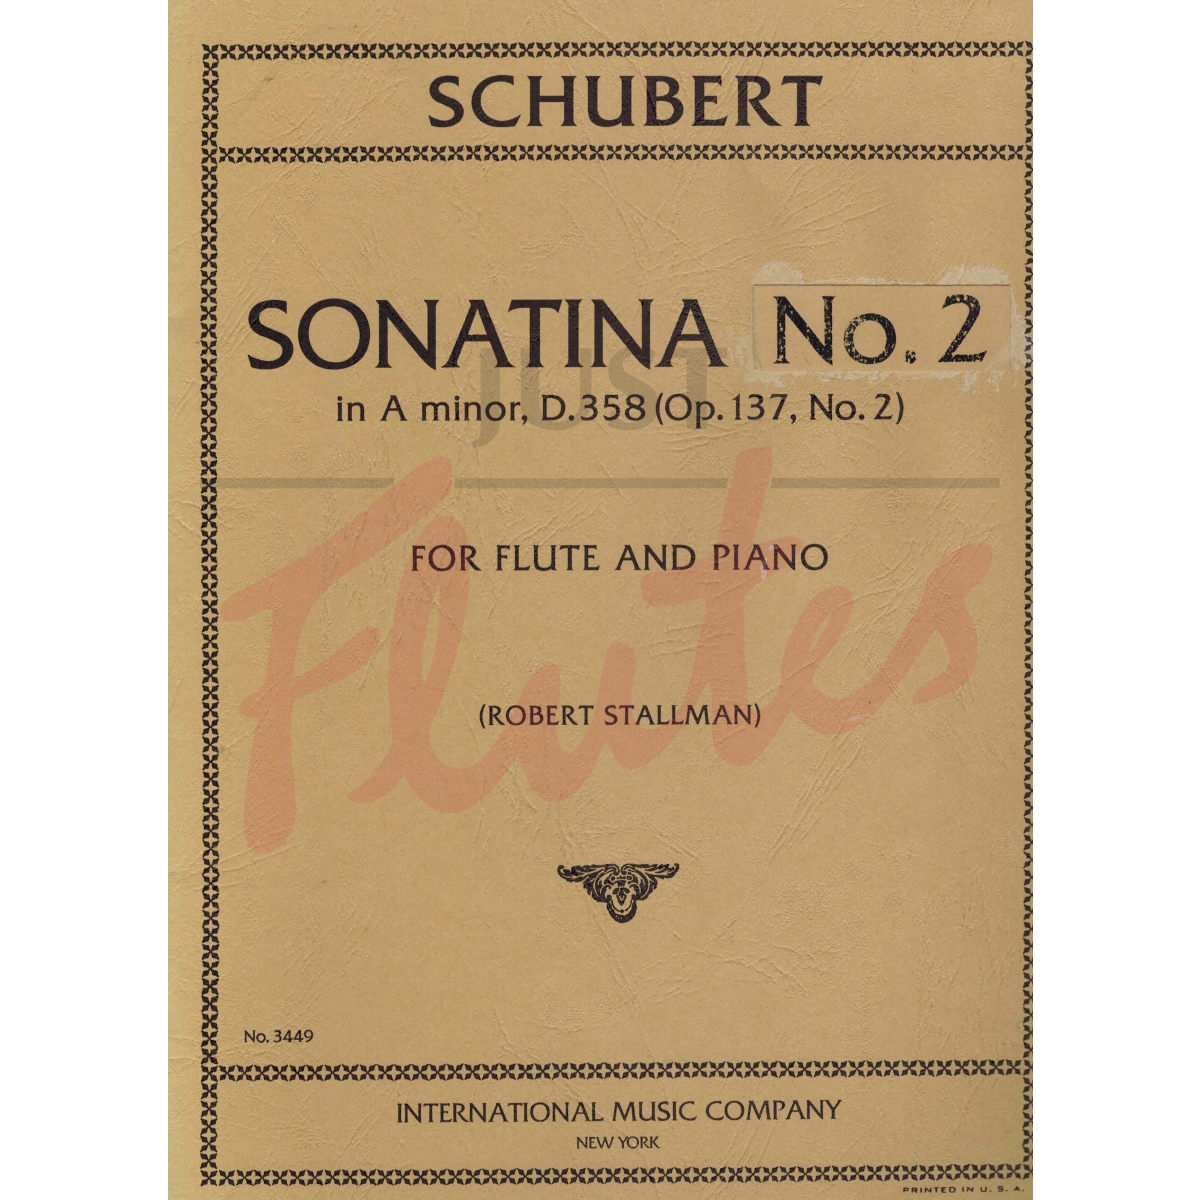 Sonatina No. 2 in A minor for Flute and Piano